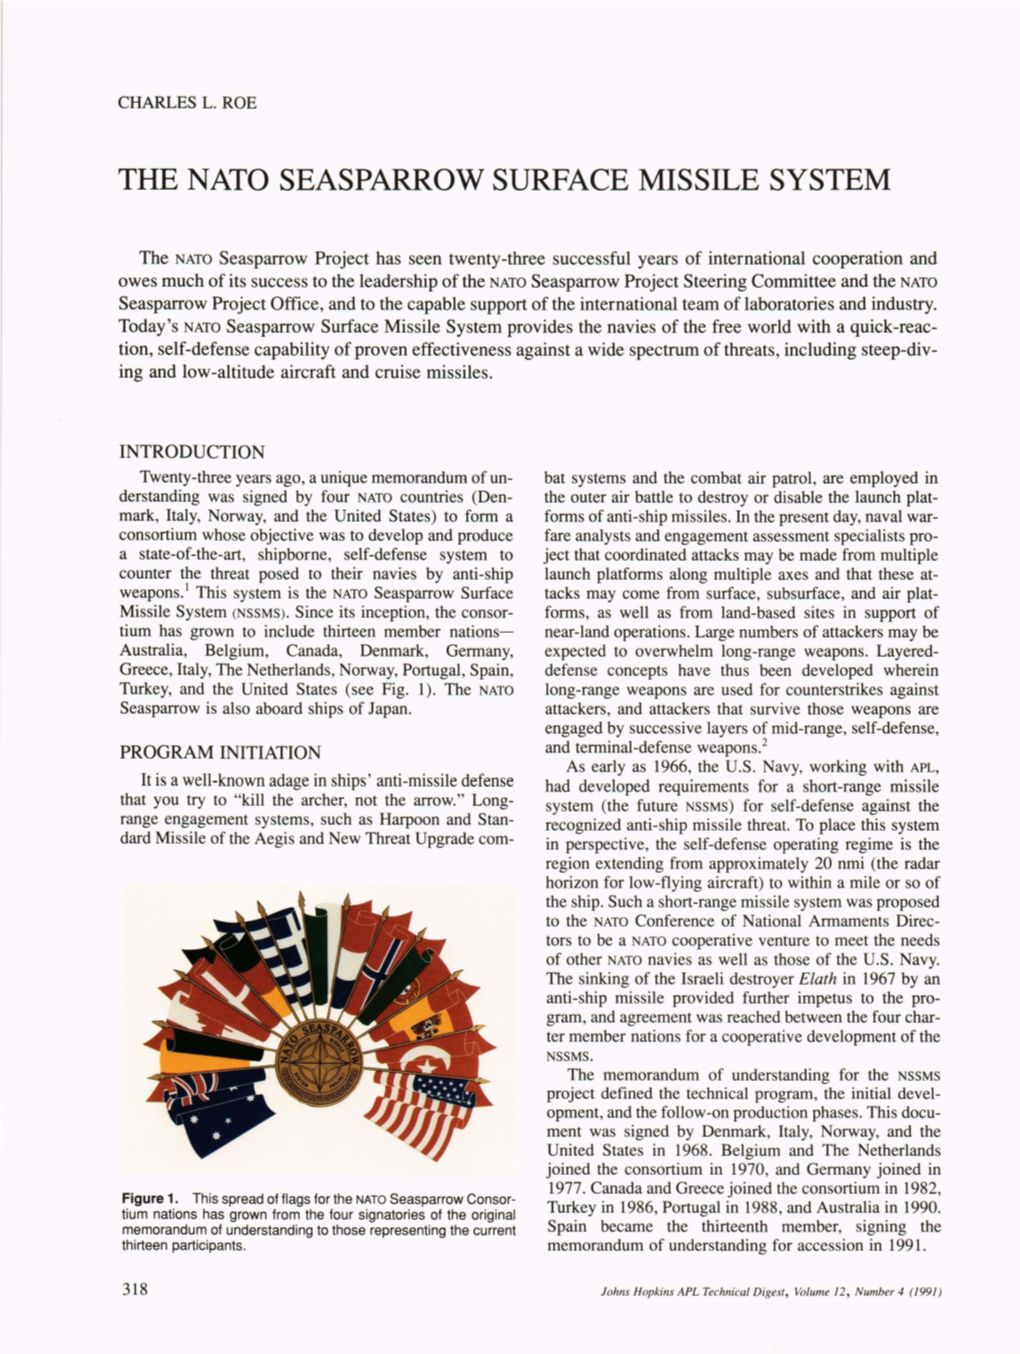 The Nato Seasparrow Surface Missile System